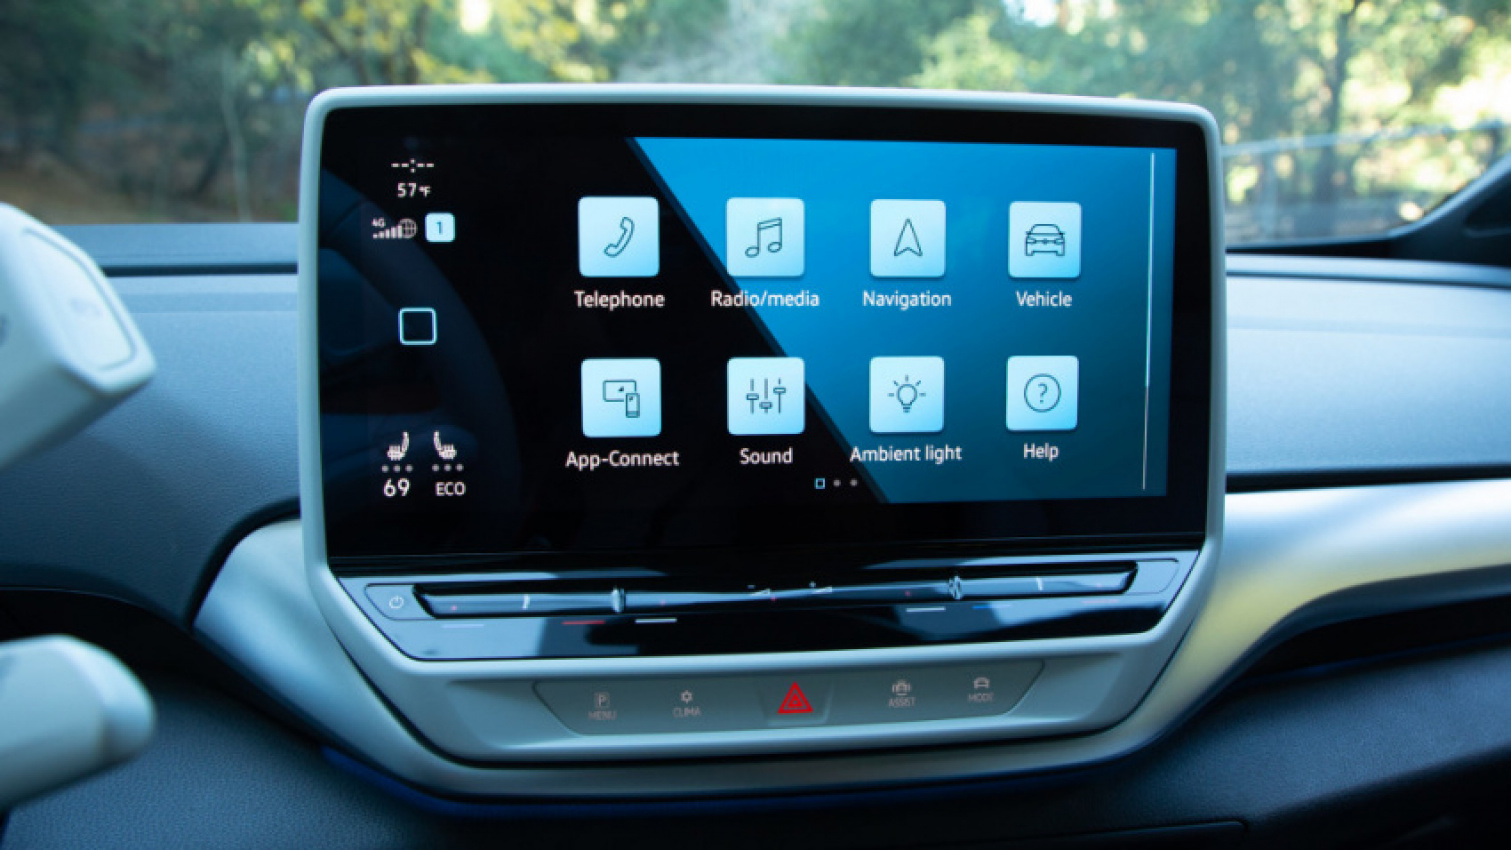 autos, cars, volkswagen, android, electric cars, first drives, volkswagen news, android, first drive review: 2021 volkswagen id.4 is buzzworthy, but a software update away from breakthrough